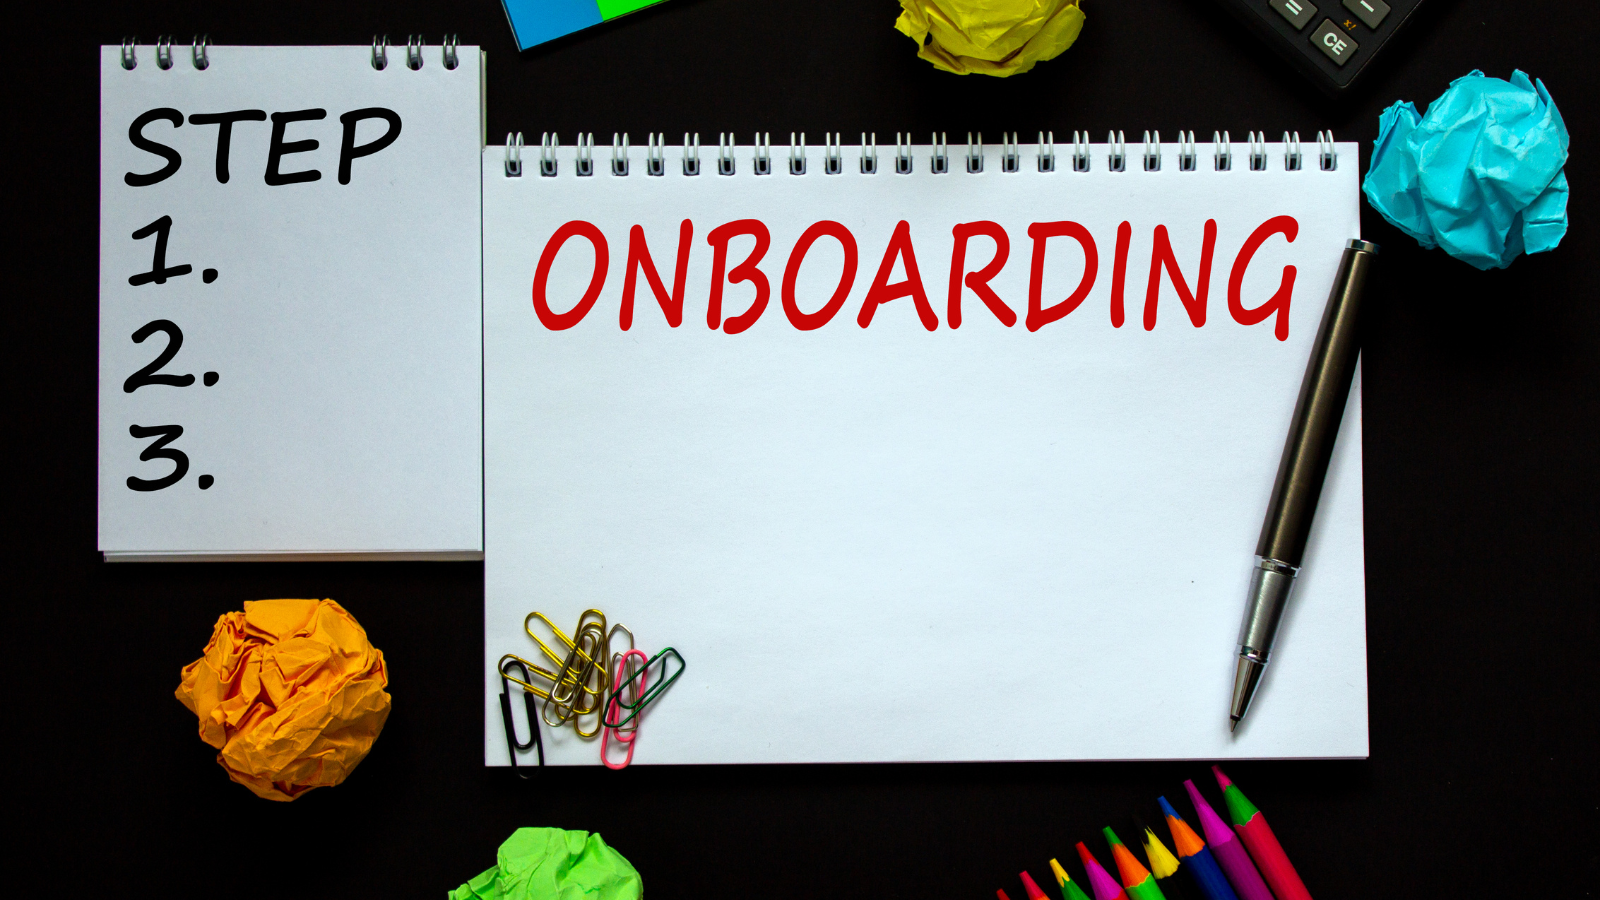 A Warm Welcome: The Importance of Employee Onboarding